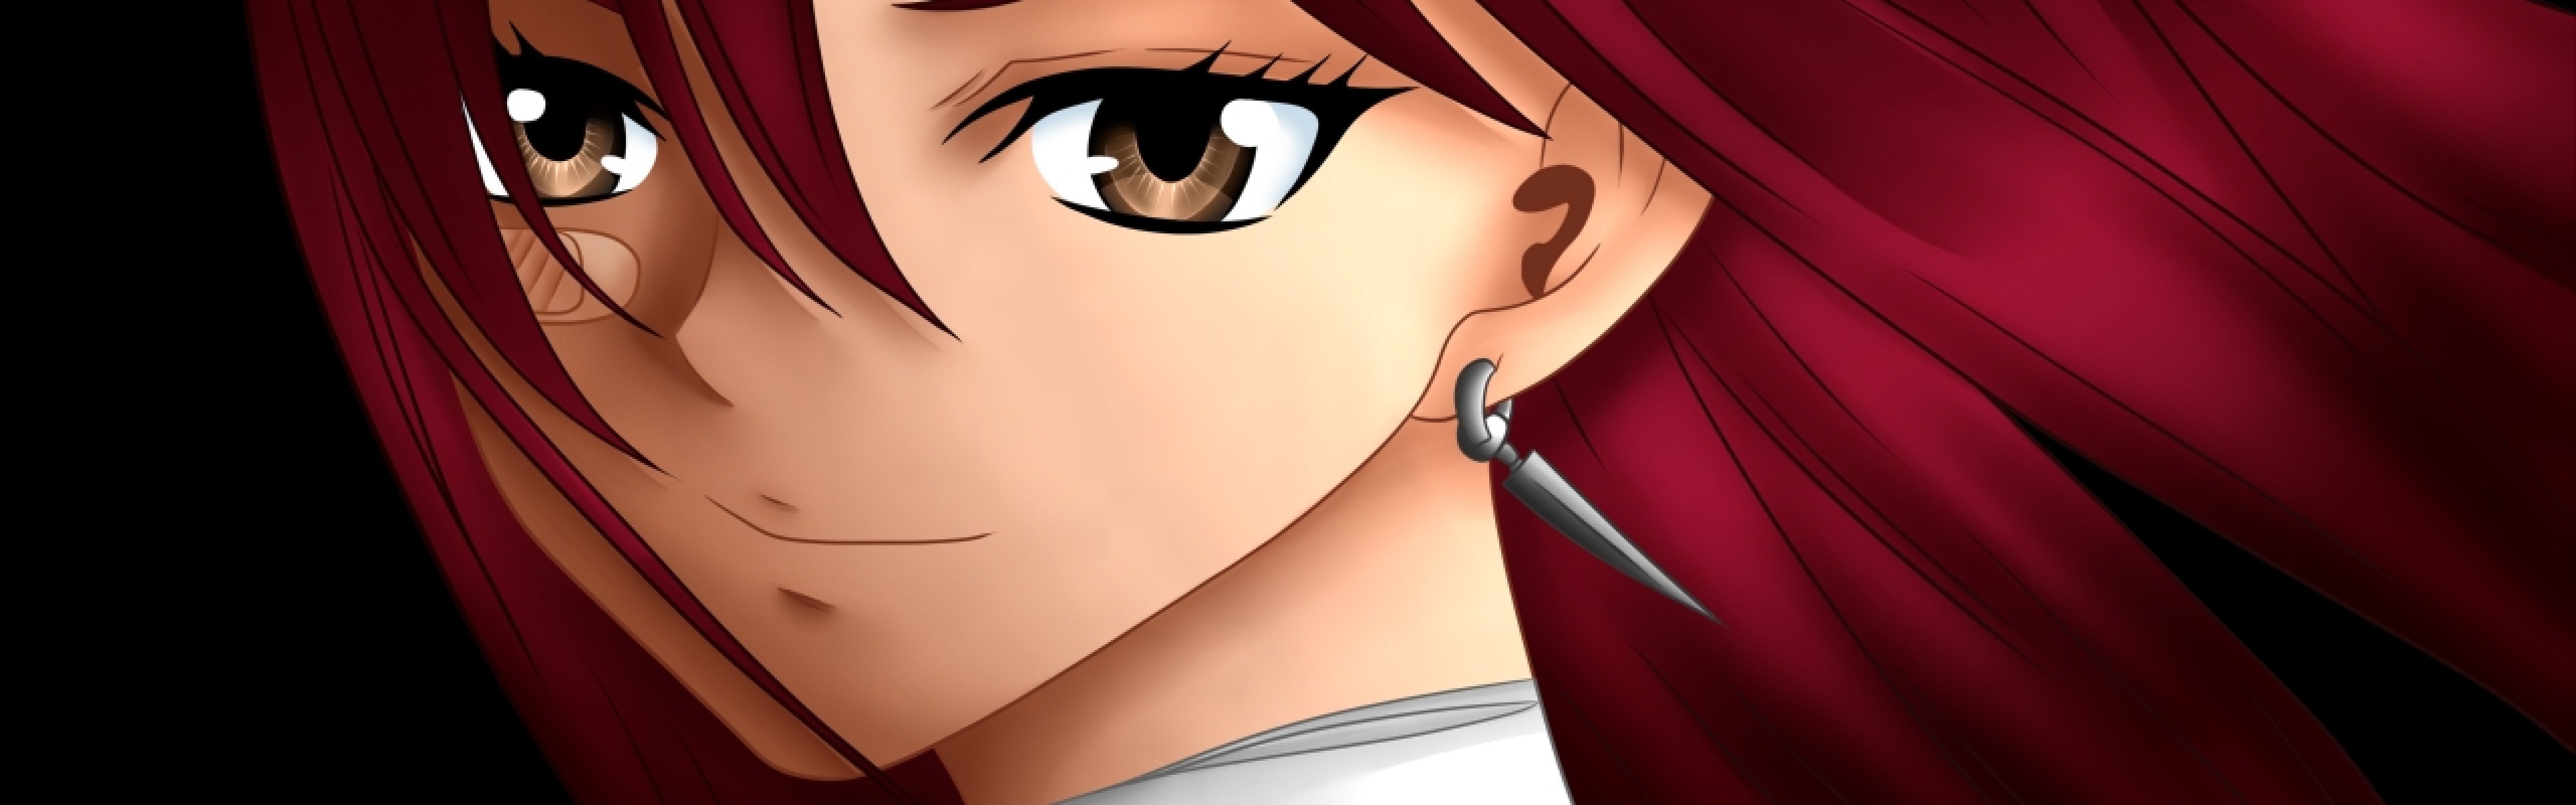 3840x1200 Related Wallpapers erza scarlet, fairy tail. Preview erza scarlet